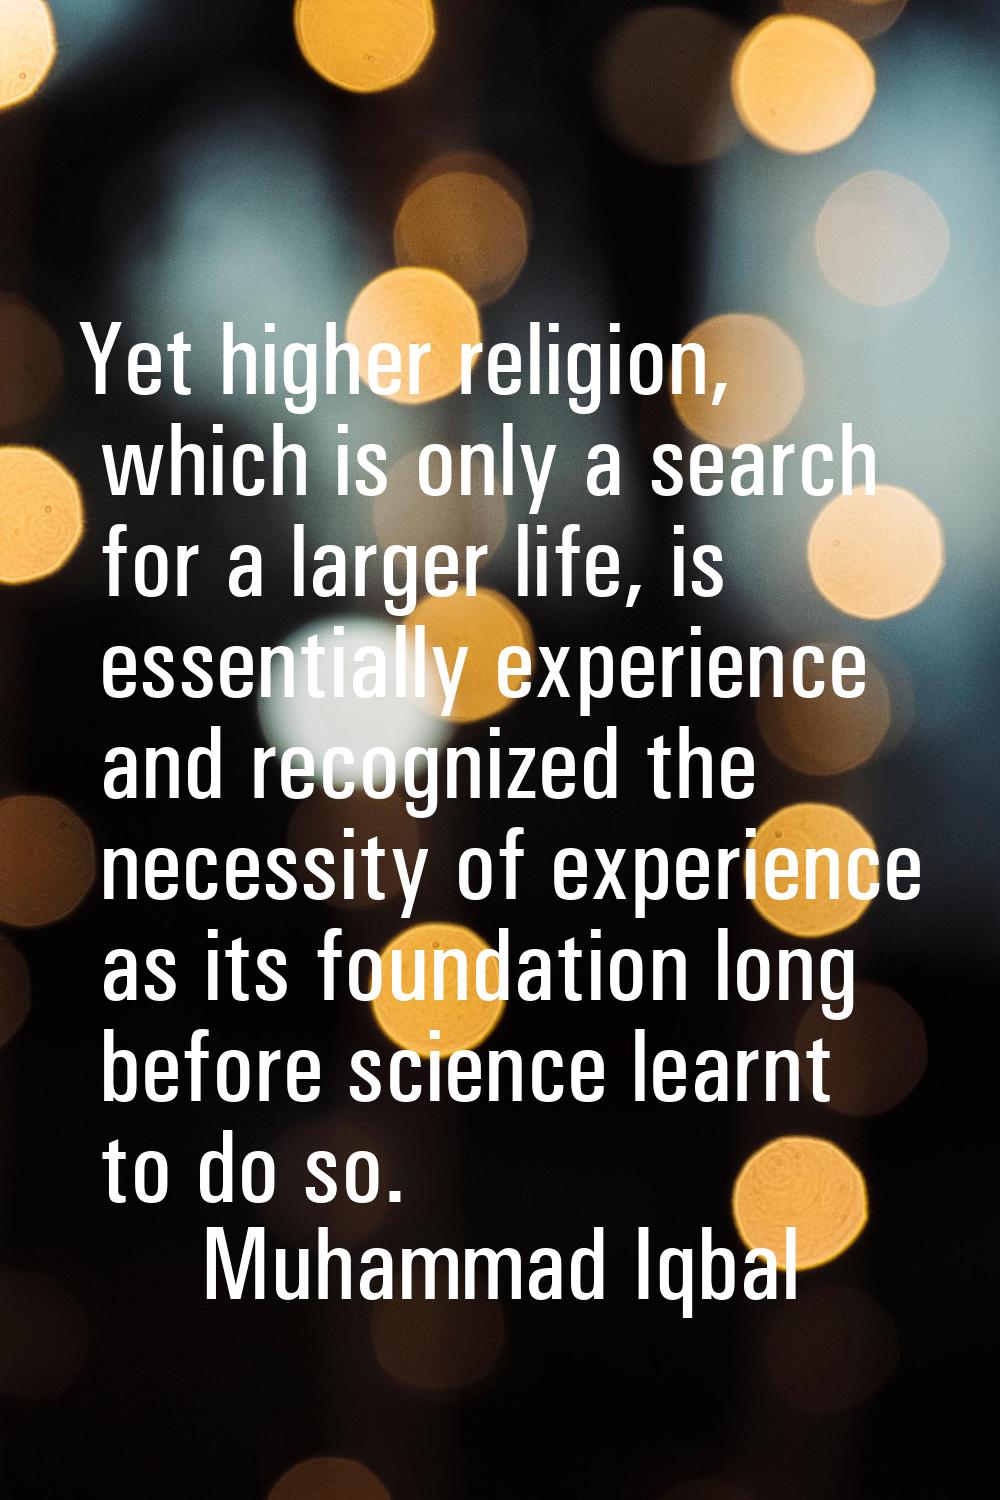 Yet higher religion, which is only a search for a larger life, is essentially experience and recogn